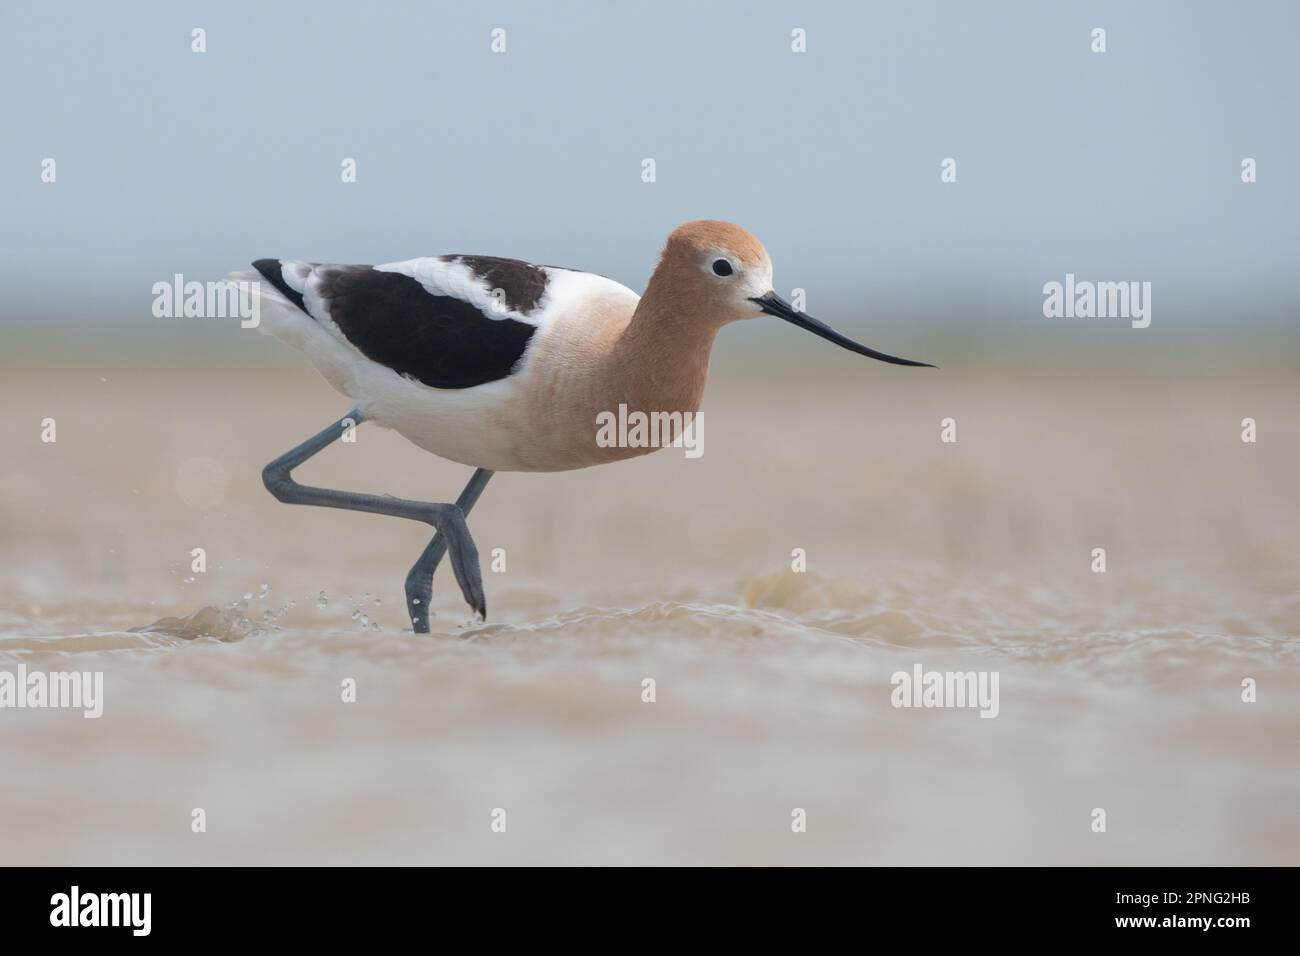 An American avocet, Recurvirostra americana, wading in a seasonal vernal pool in the Central Valley of California. Stock Photo